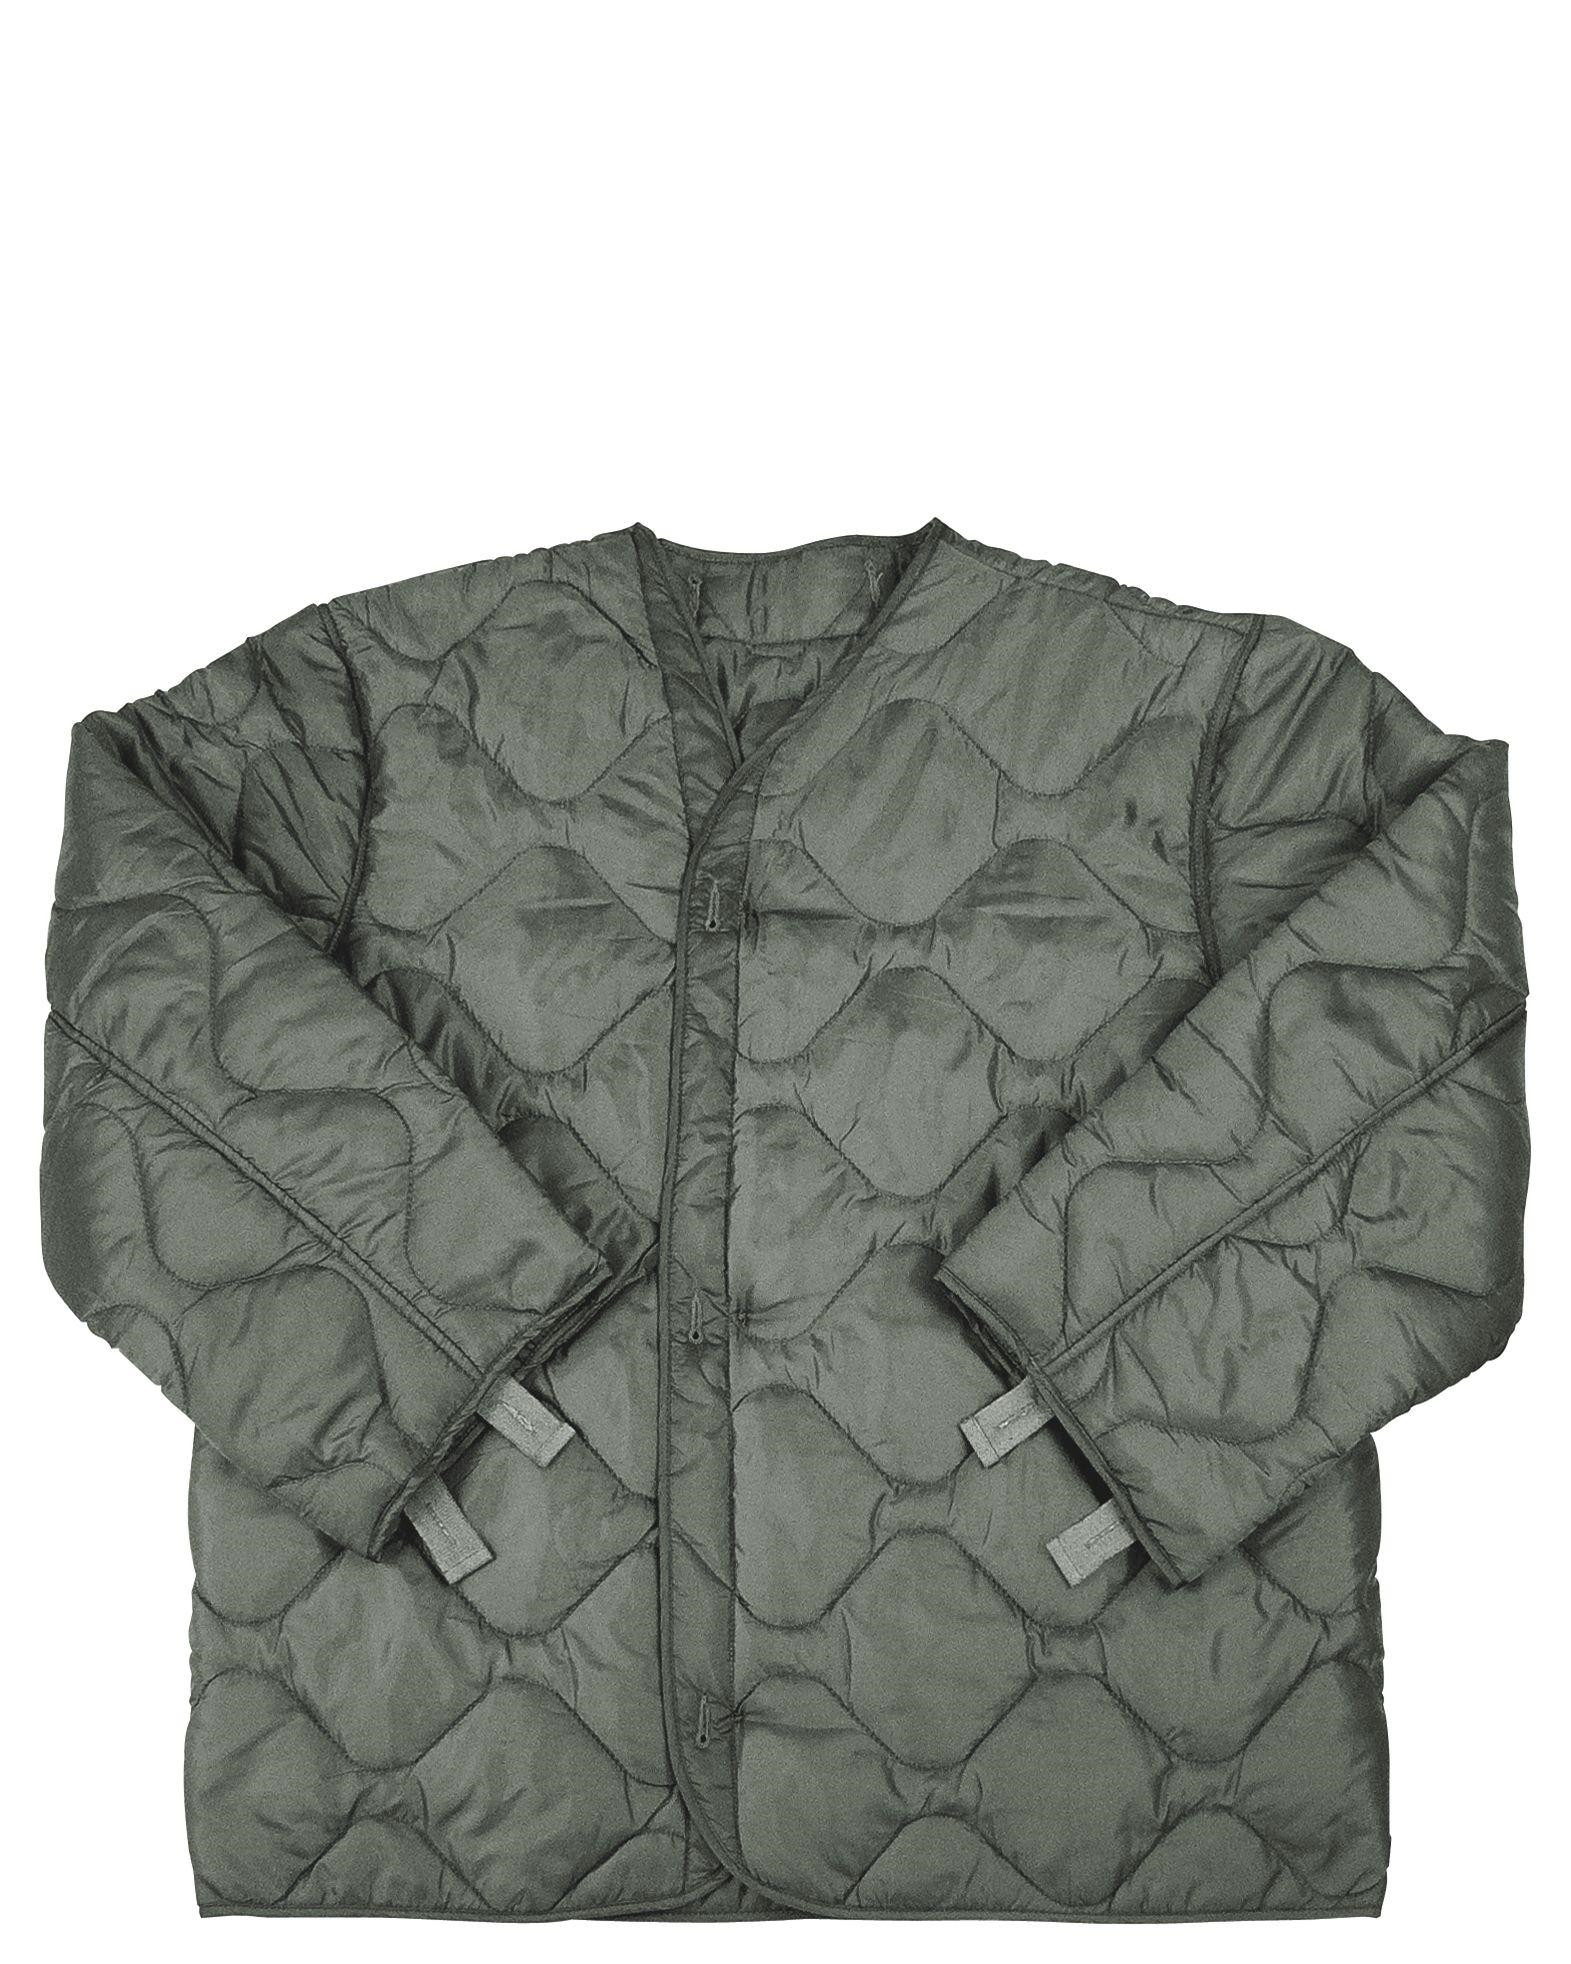 M-65 FIELD JACKET LINER BLACK QUILTED NYLON ROTHCO 8294